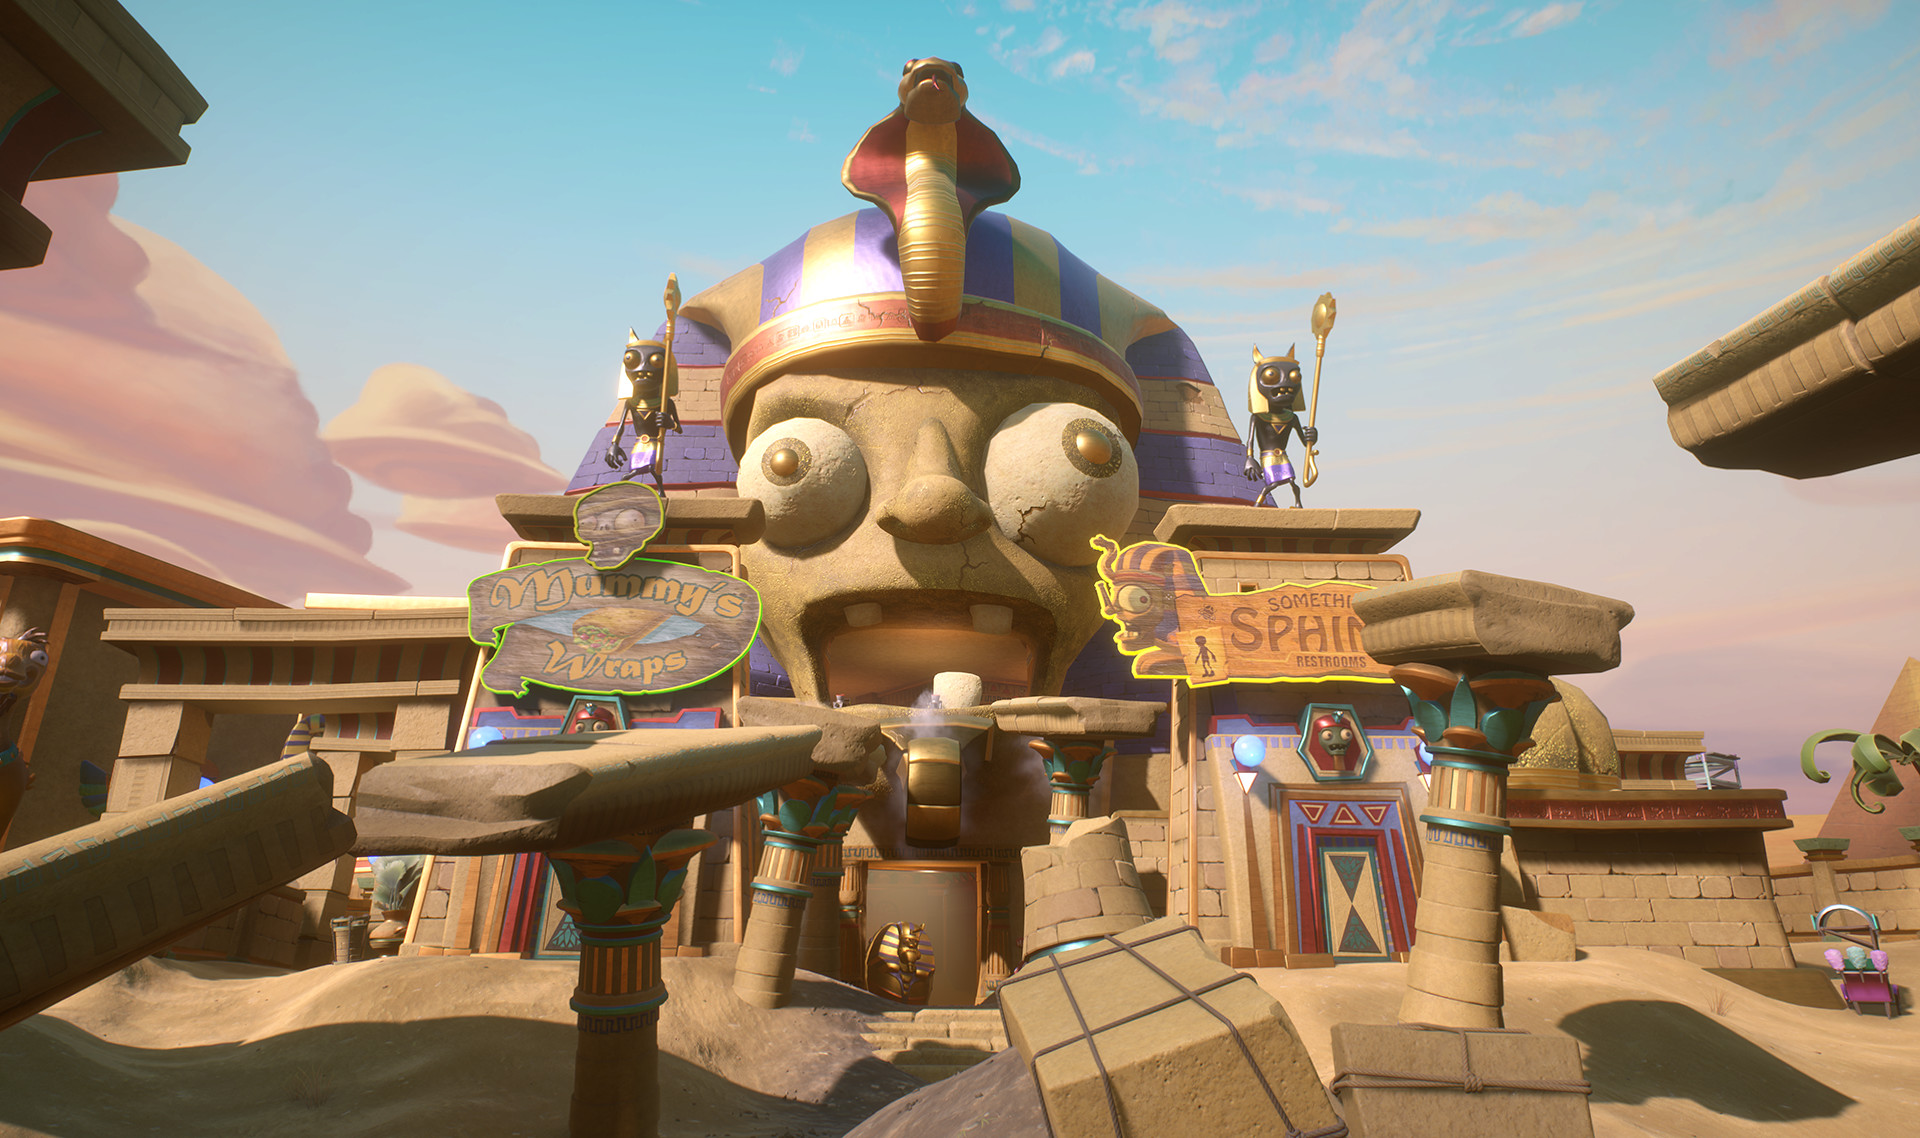 A screenshot from Plants vs Zombies: Garden Warfare 2. I created 3D environment concepts, final assets and environments